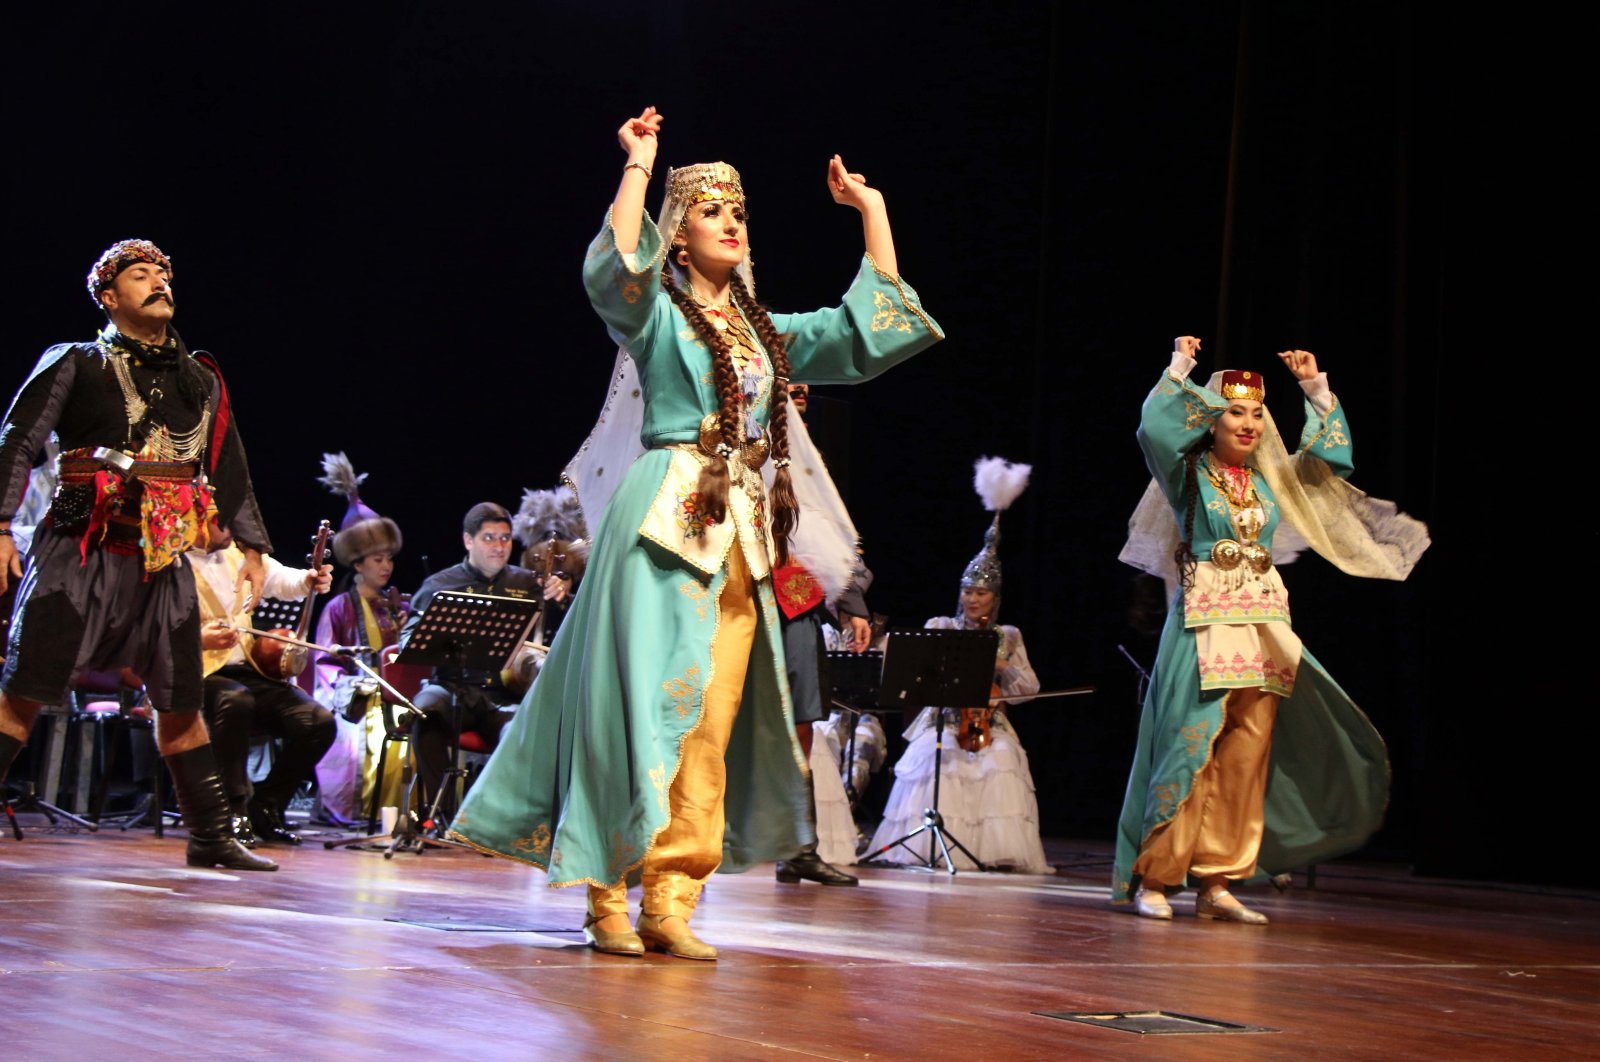 The TÜRKSOY folk orchestra performs a show as part of Nevruz celebrations at Uşak University, in the namesake western Turkish province, March 17, 2022. (AA Photo)